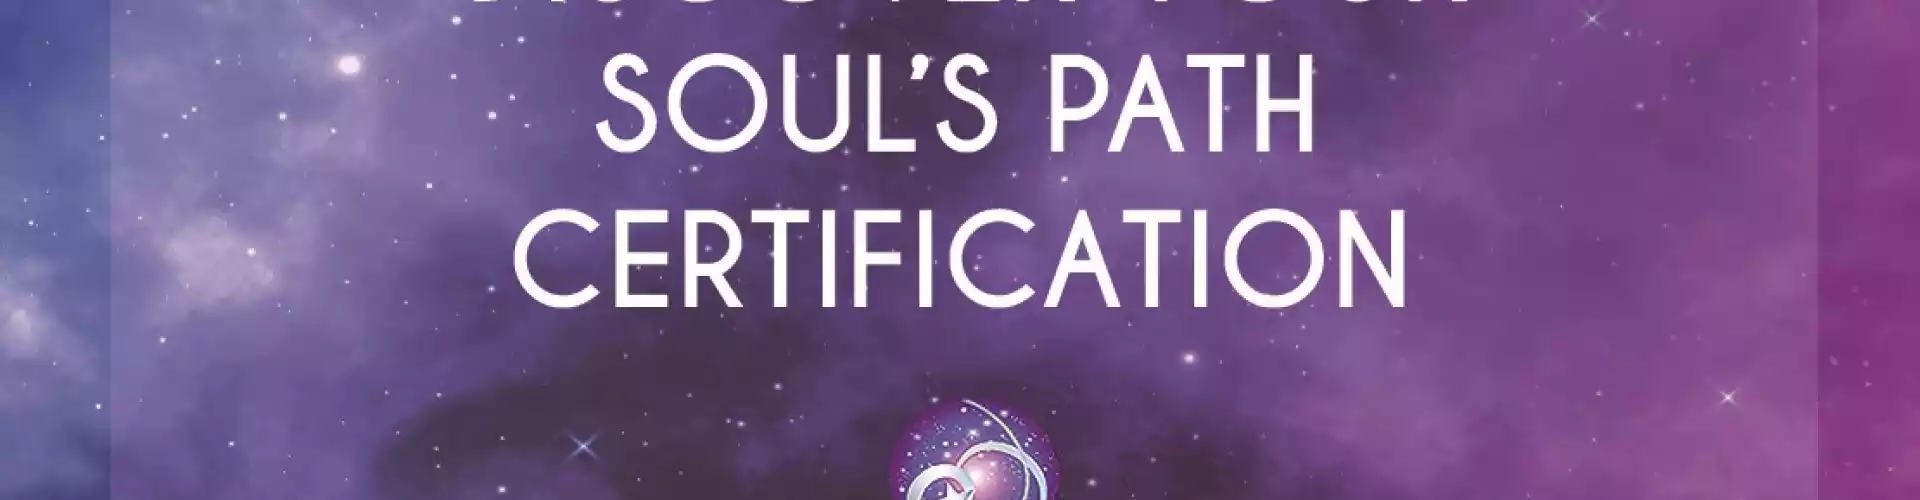 Discover Your Soul"s Path Certification